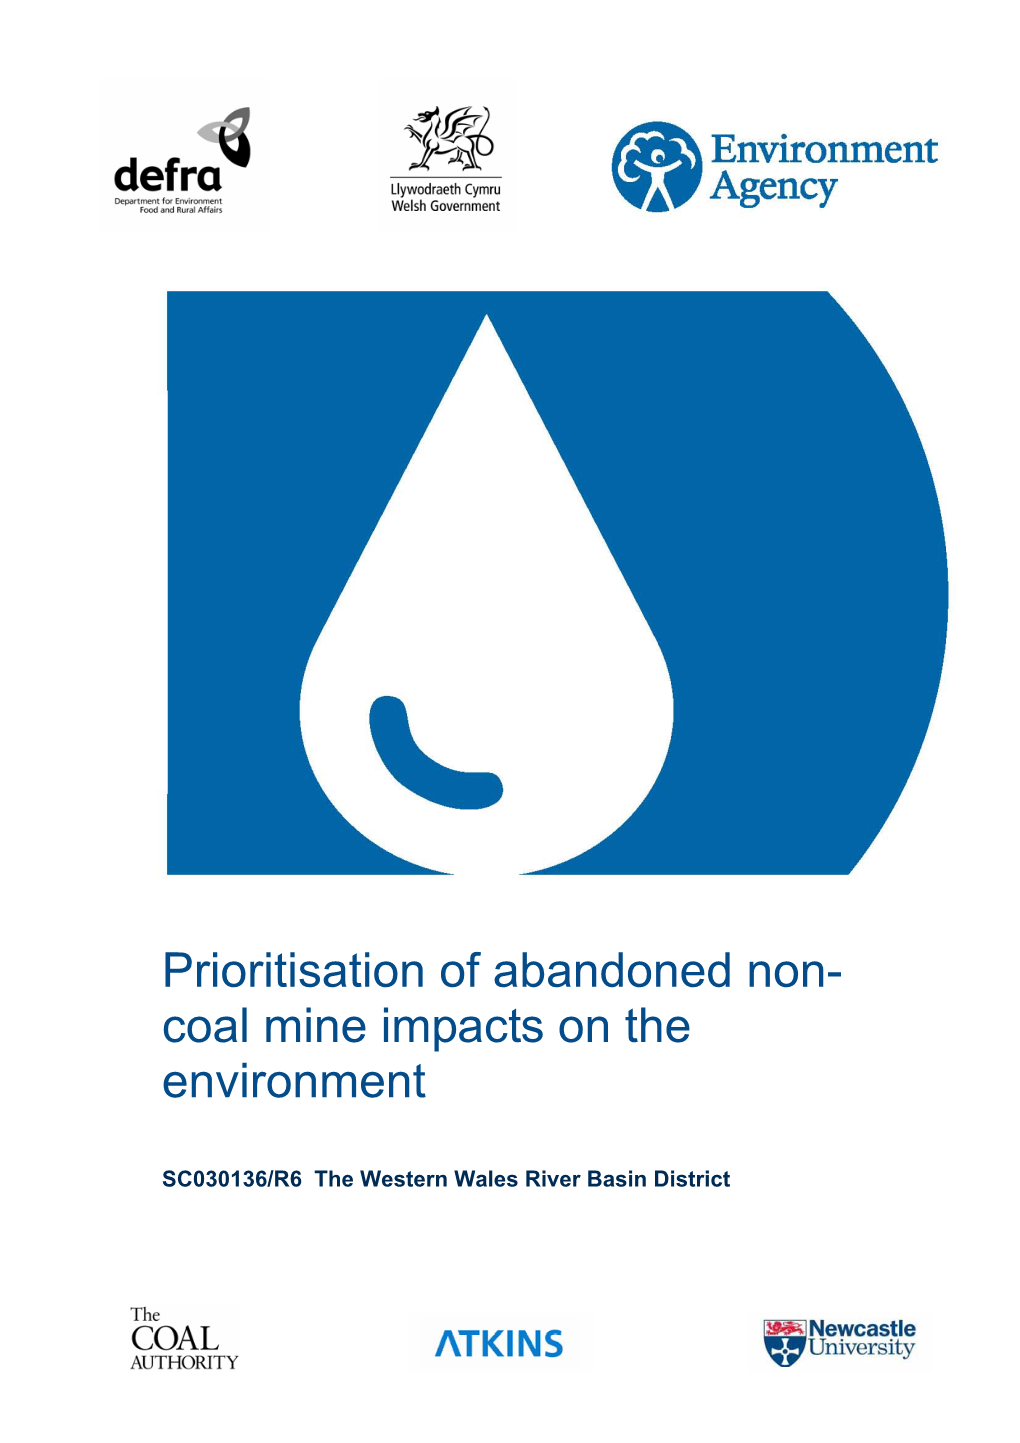 Prioritisation of Abandoned Non-Coal Mine Impacts on the Environment.VI. the Western Wales River Basin